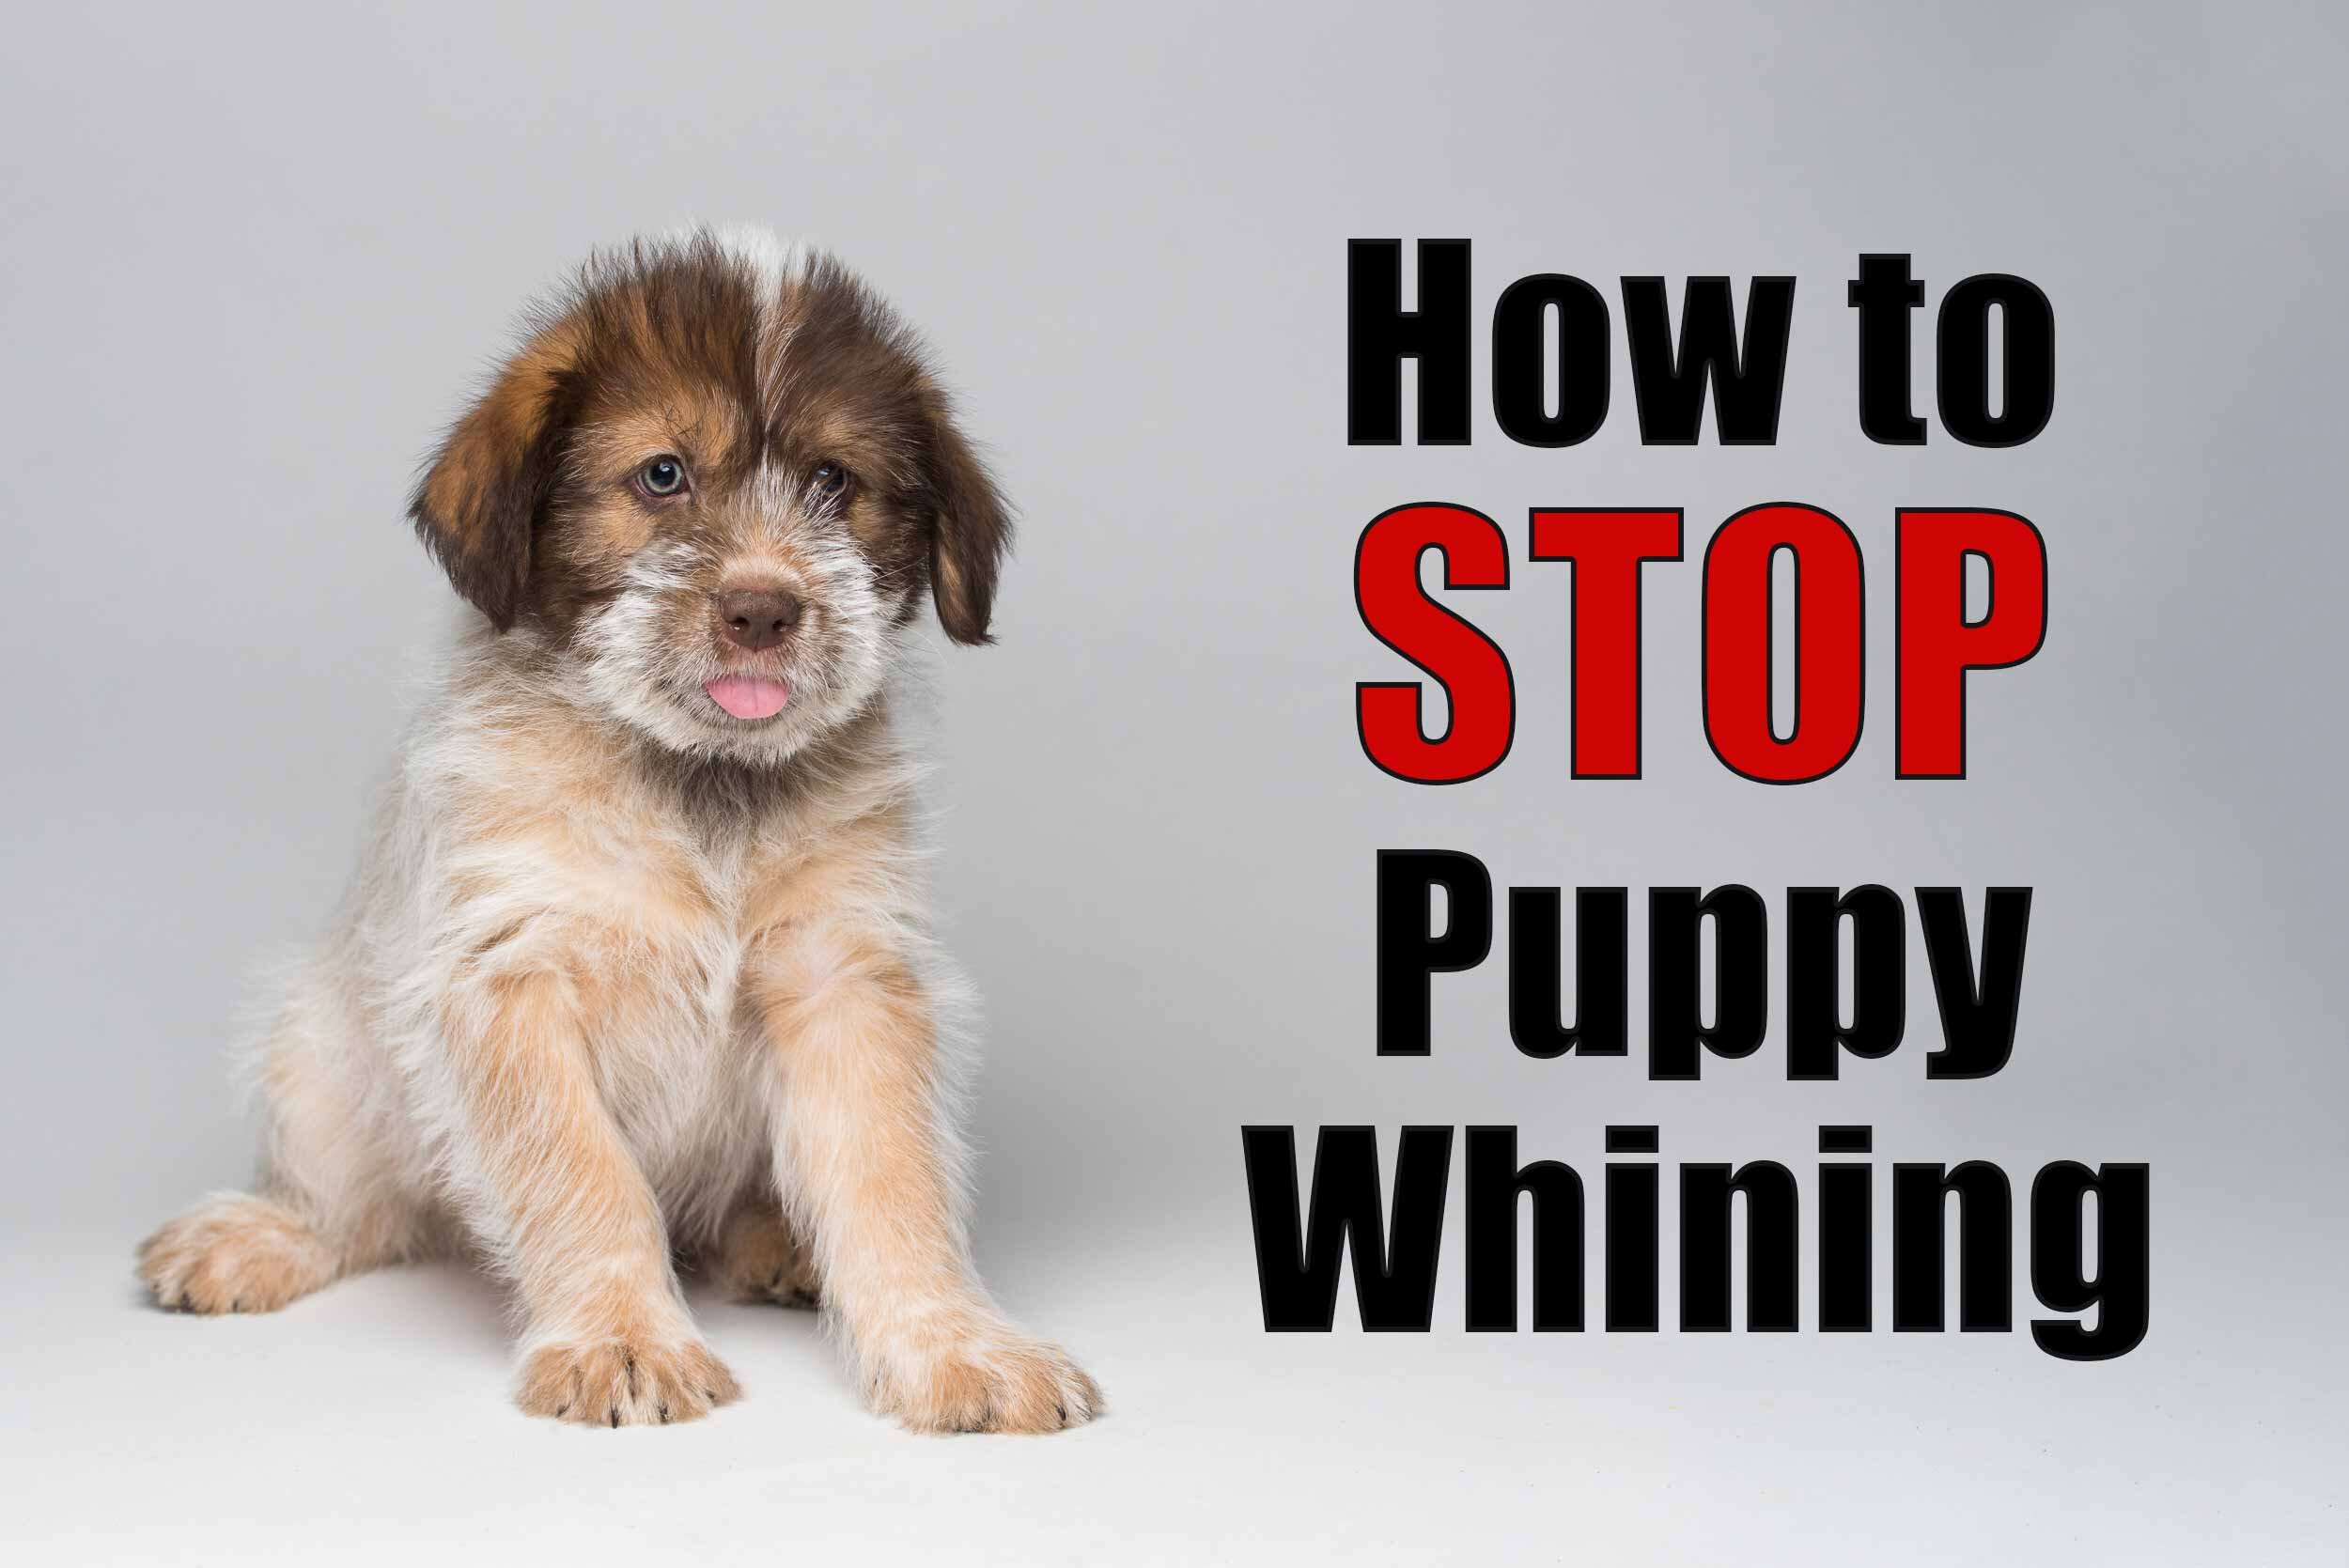 why do puppies keep whining